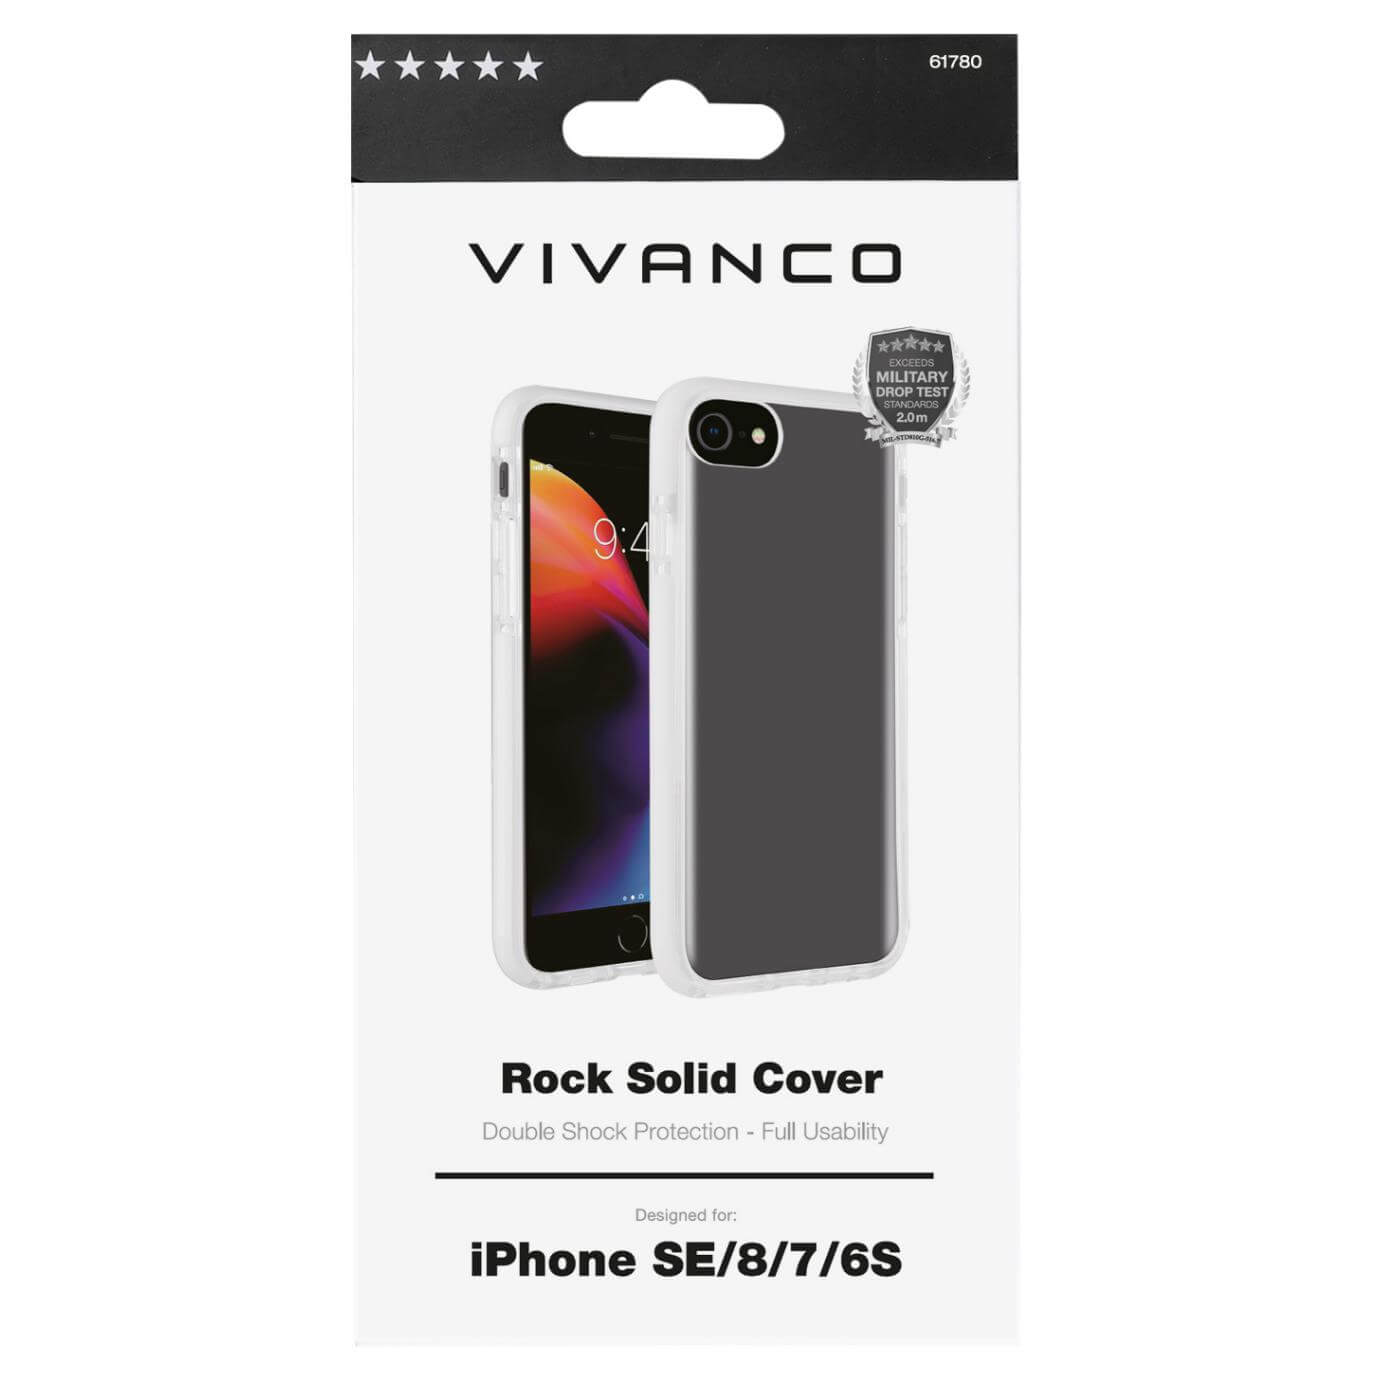 Image of VIVANCO ROCK SOLID COVER - IPHONE SE/8/7/6S - WHITE